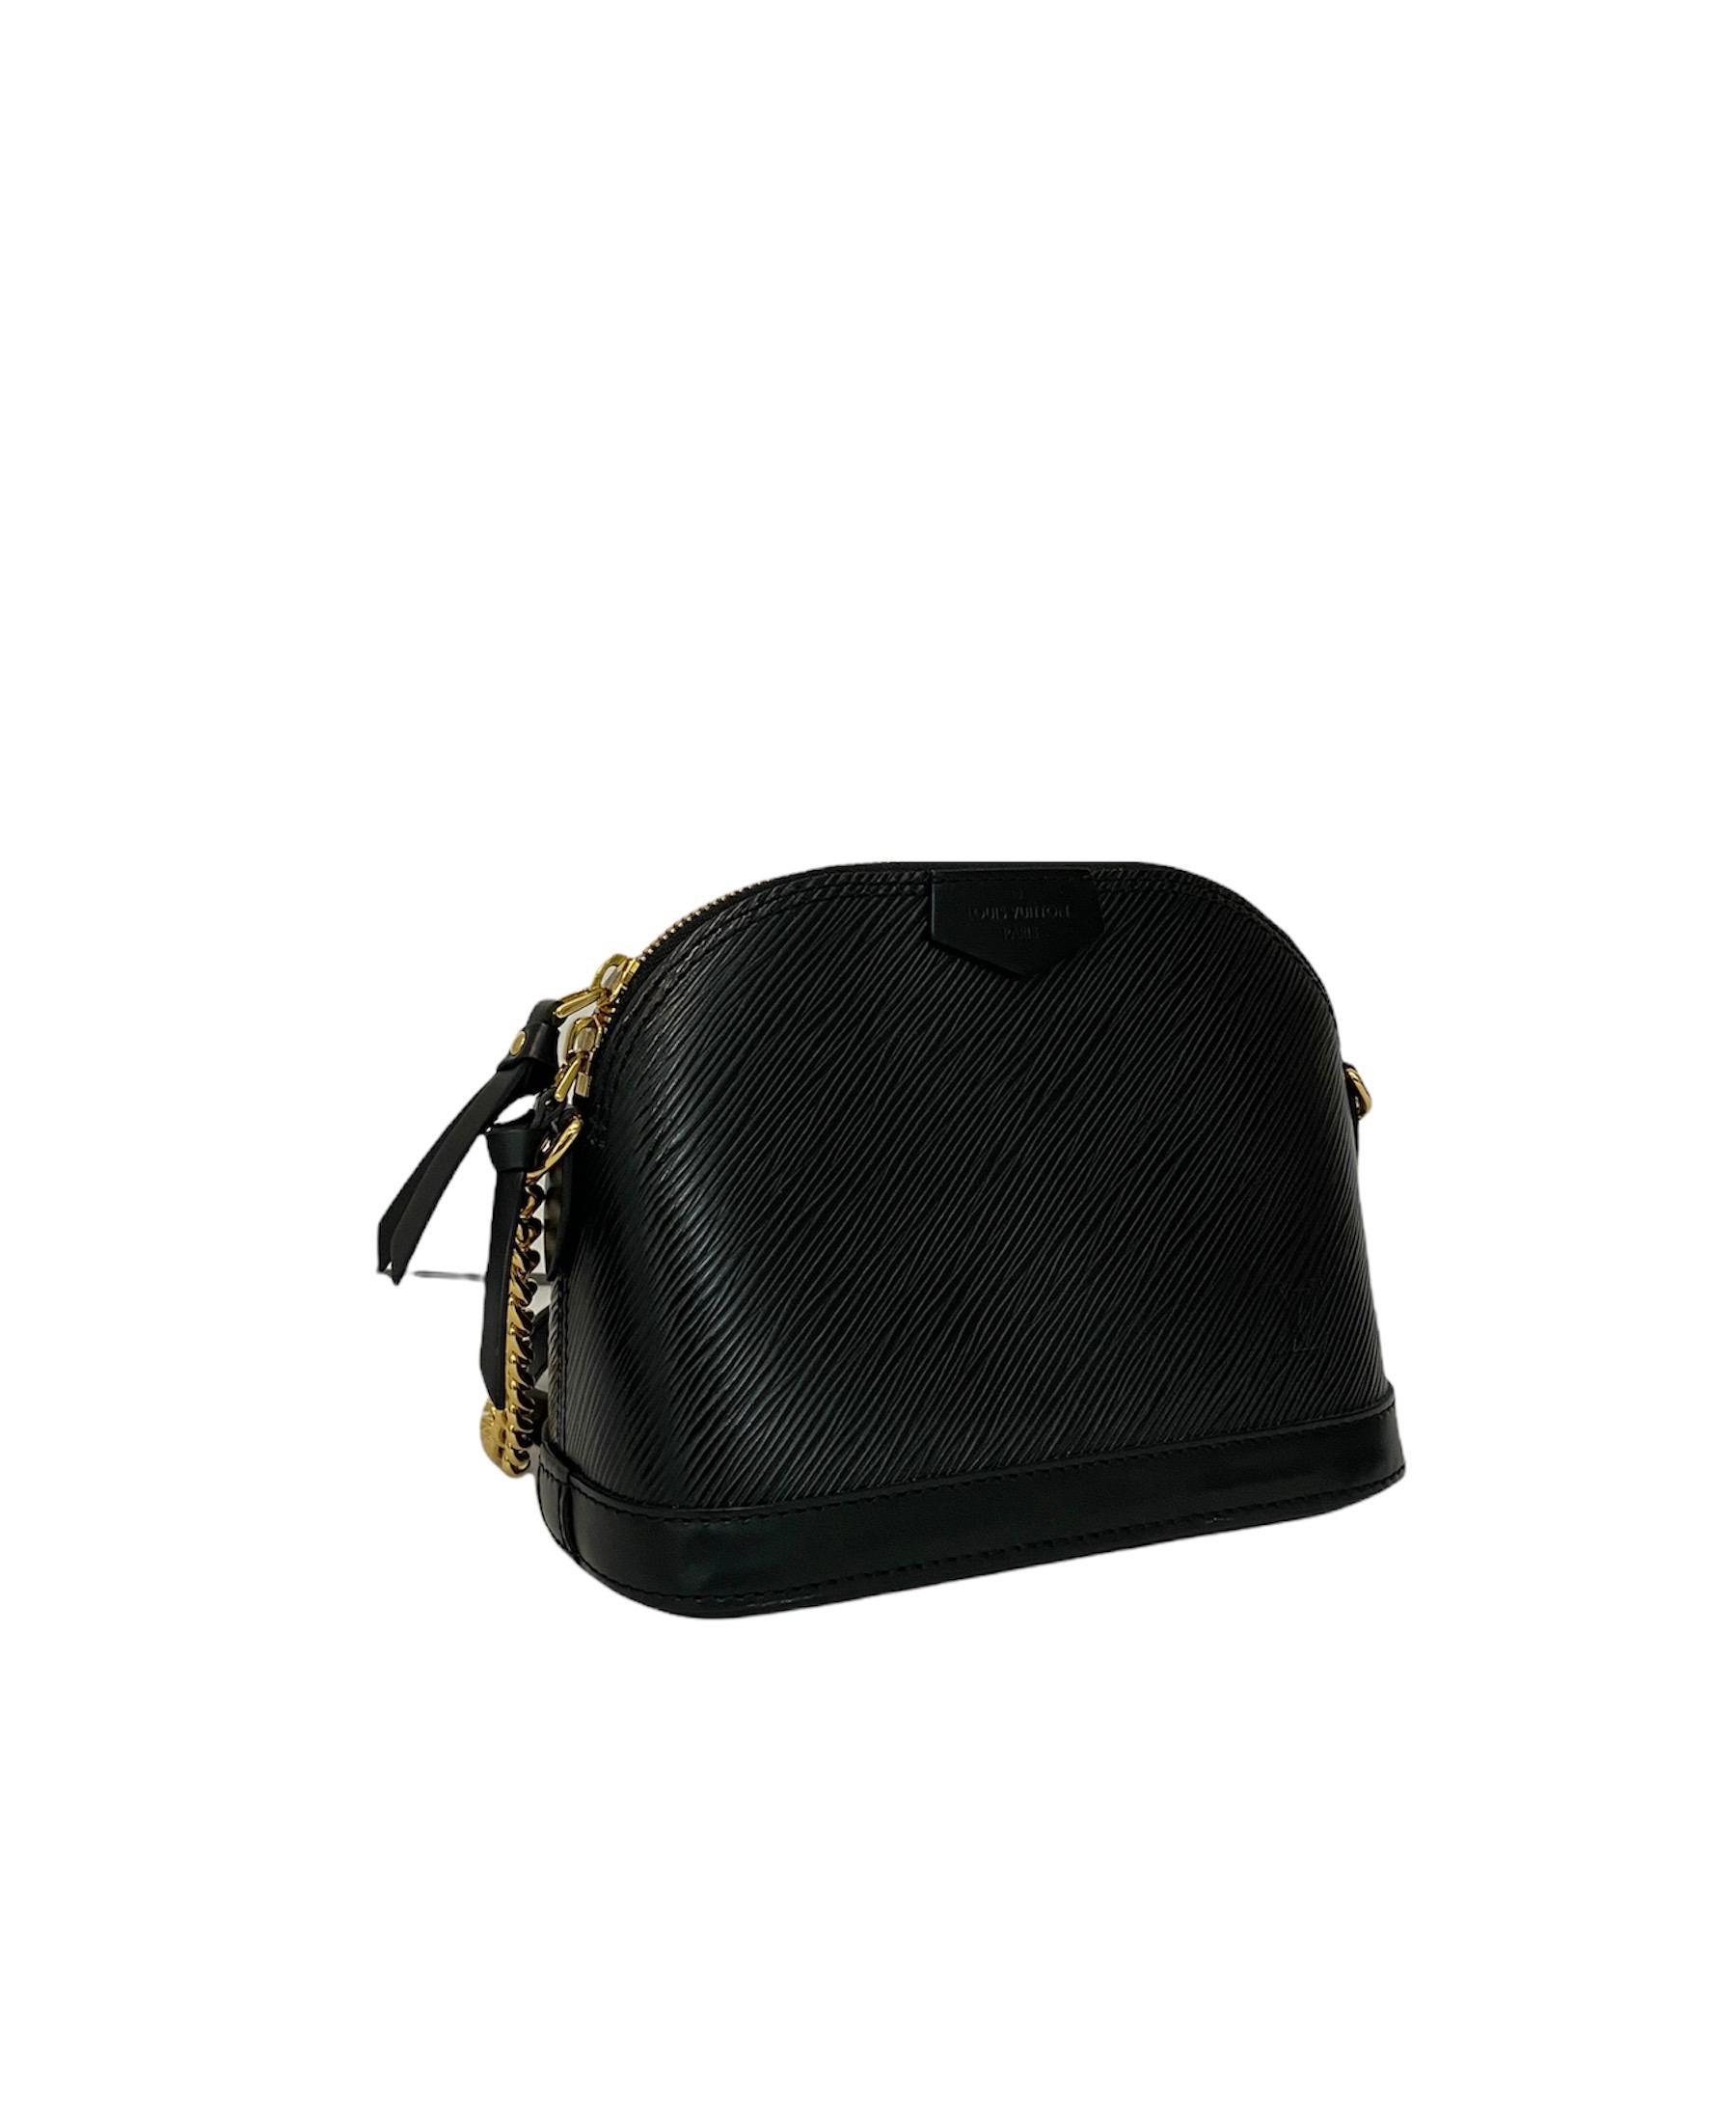 Louis Vuitton Alma bag size PM in black Epi leather with golden hardware. It has a central opening with zip closure. The interior is lined with a black suede and is equipped with a side pocket. In addition, it is equipped with a shoulder strap in